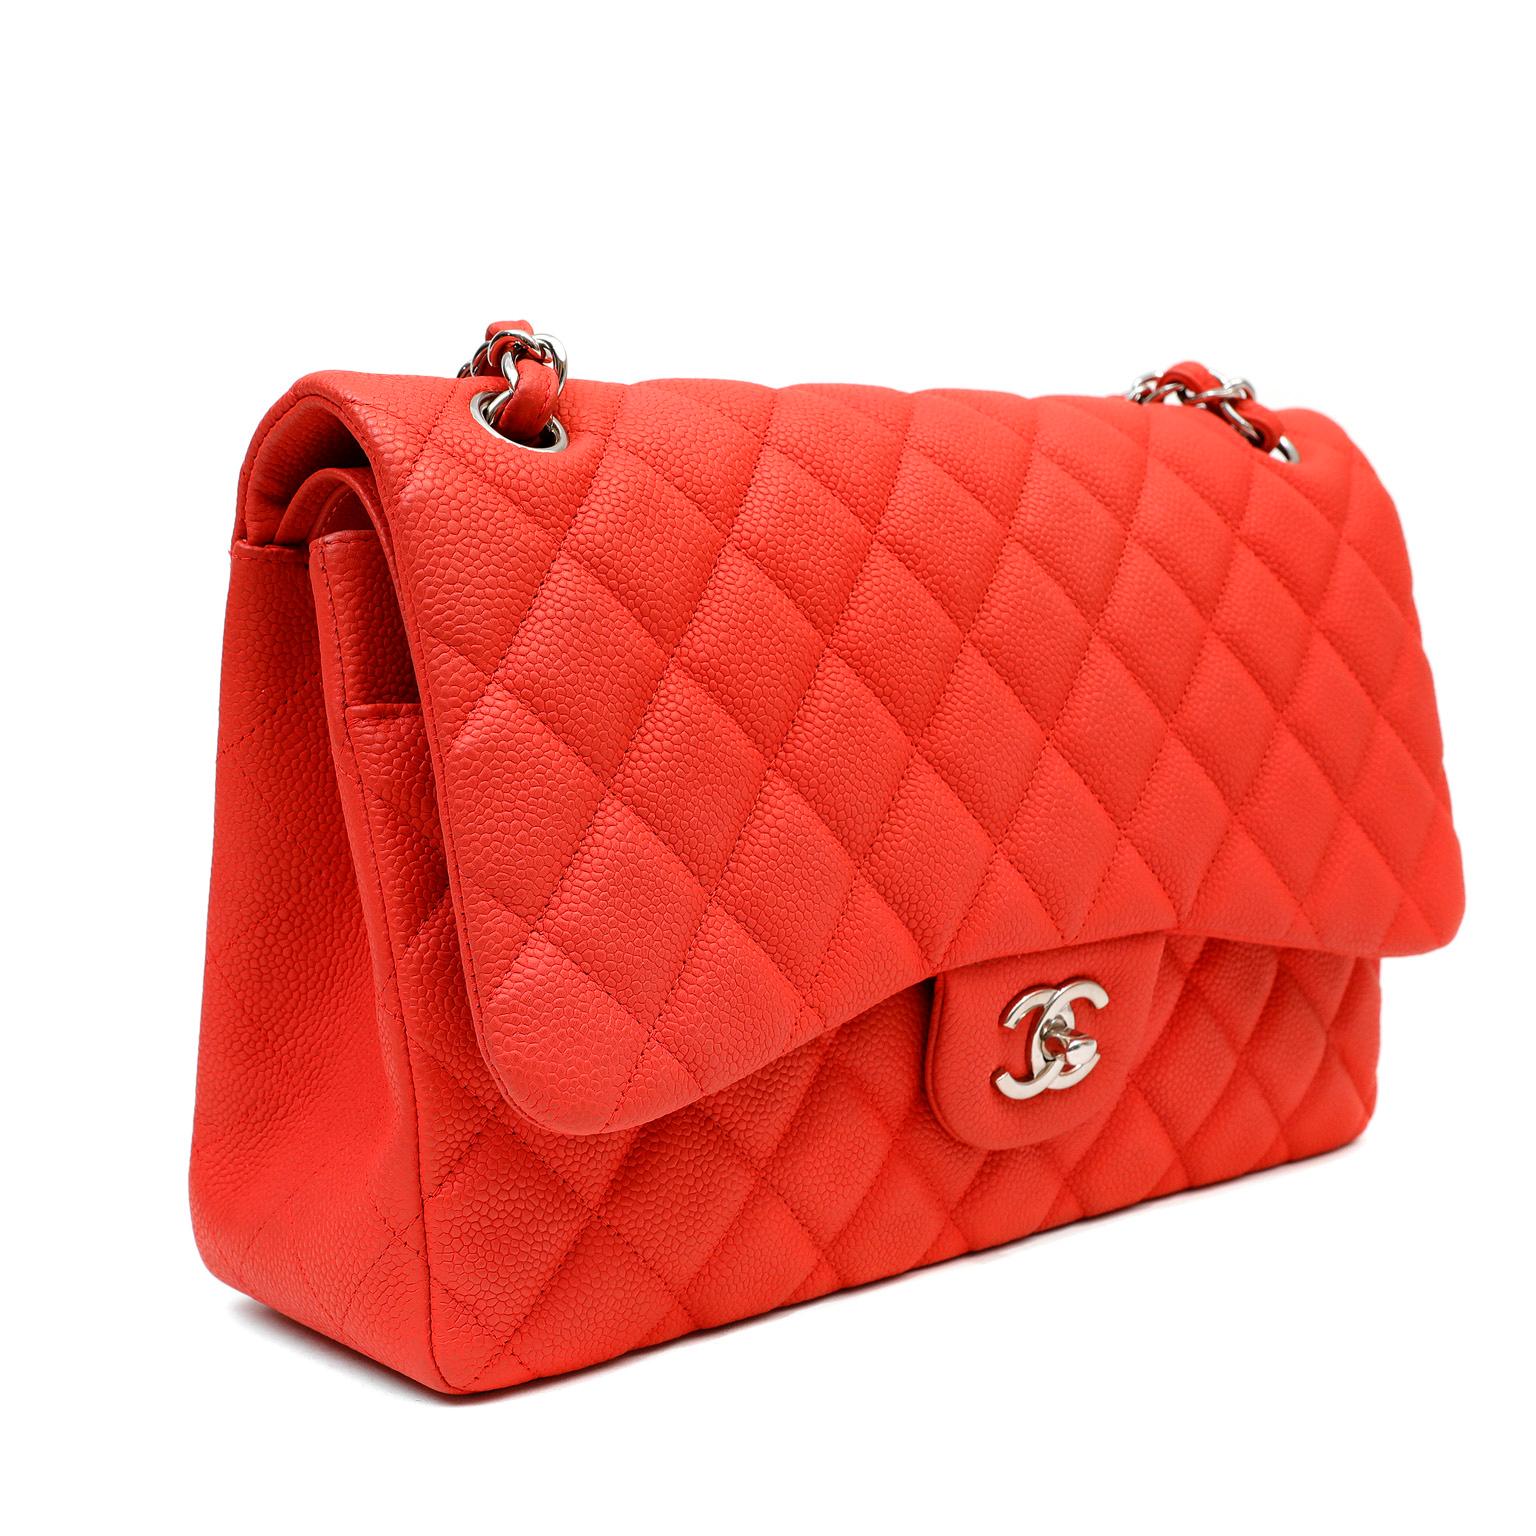 This authentic Chanel Salmon Brushed Caviar Jumbo Classic is in pristine condition.  Durable and textured brushed salmon colored caviar leather is quilted in signature Chanel diamond pattern.  Silver interlocking CC twist lock secures the exterior